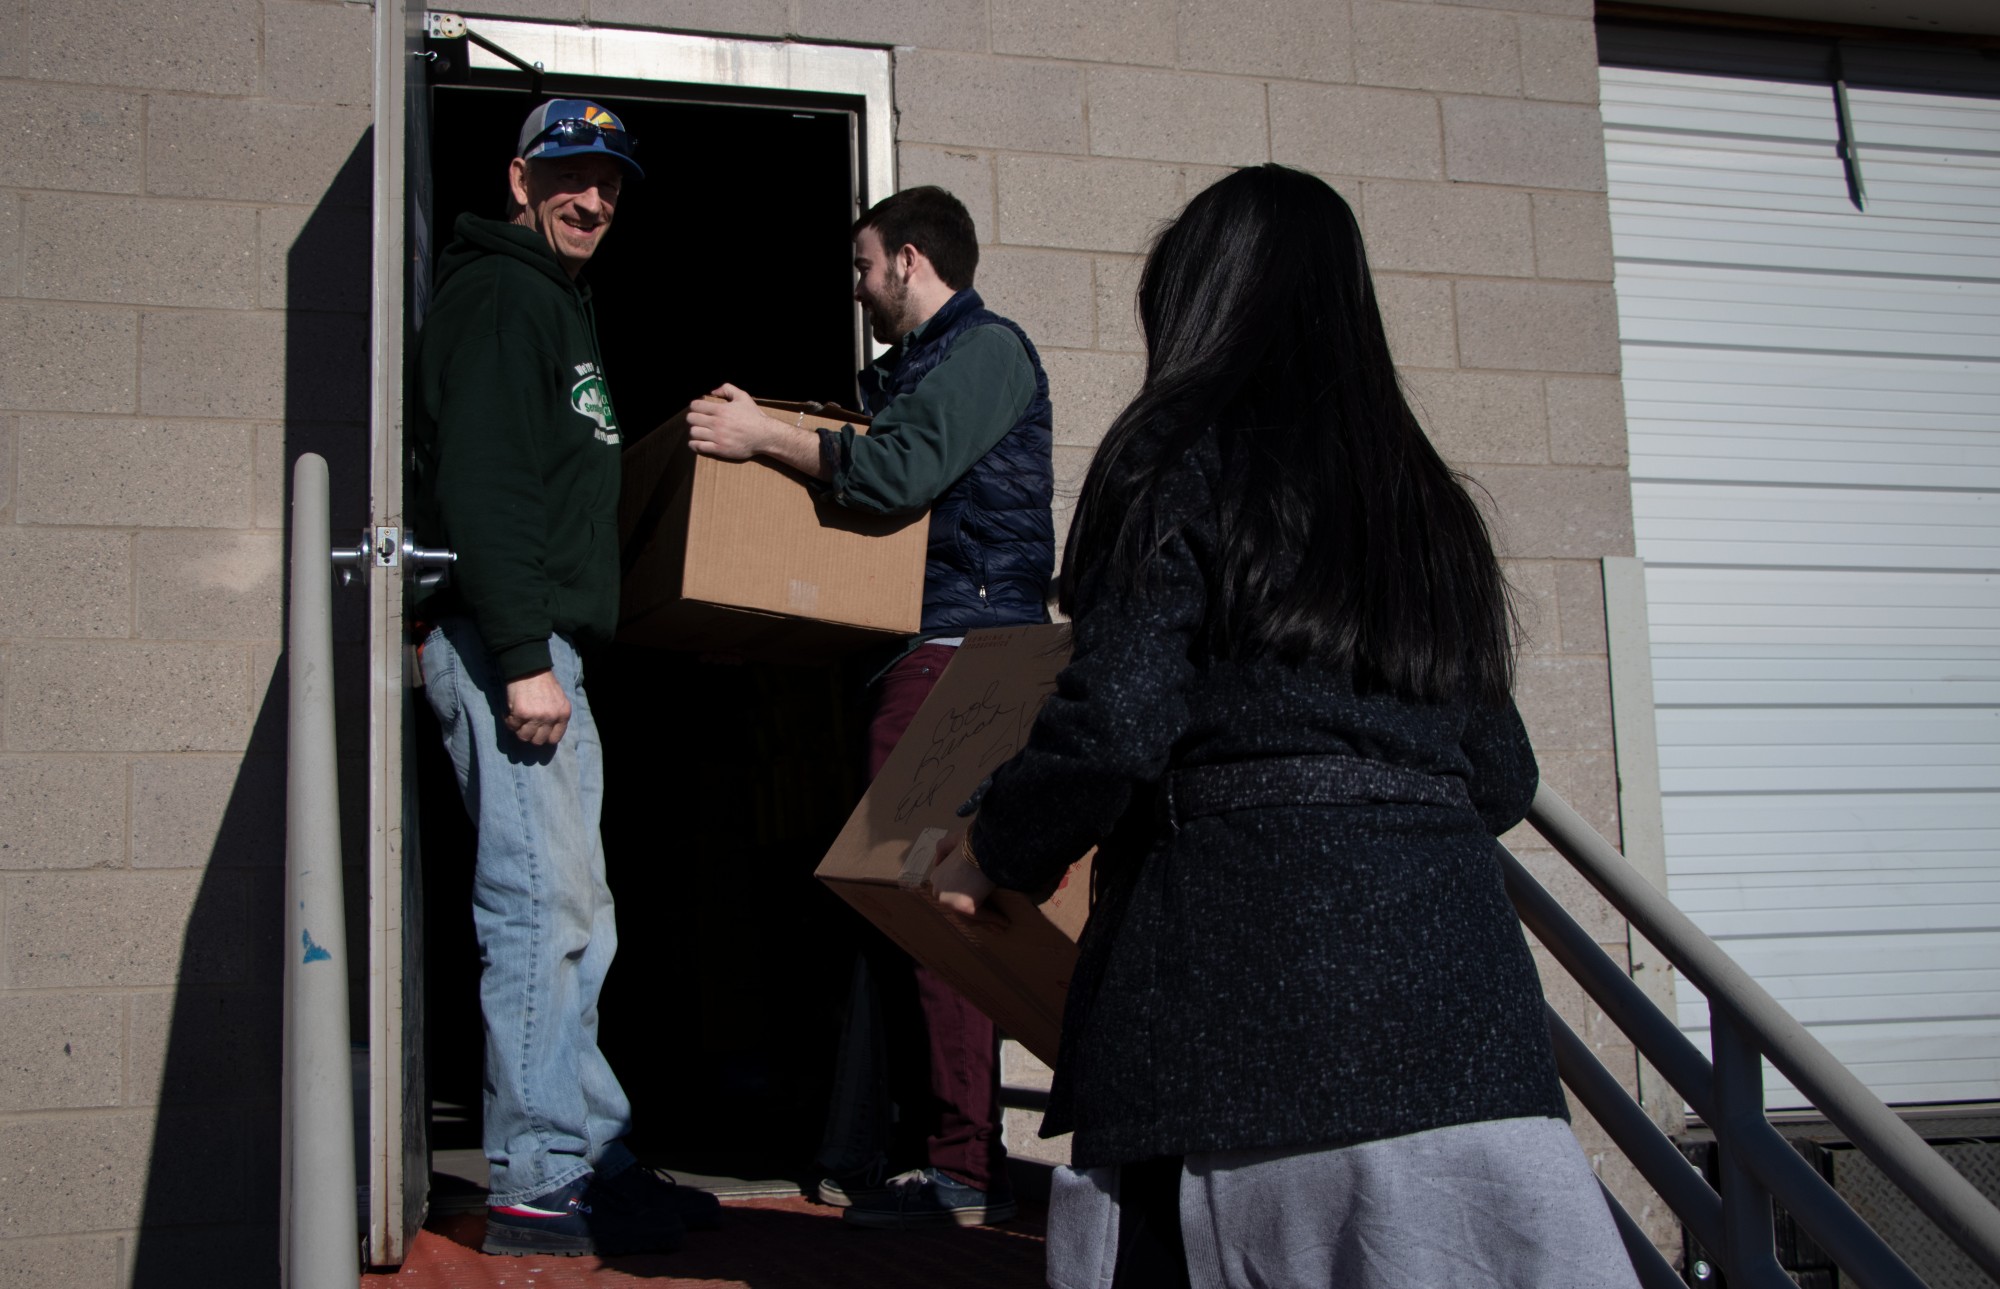 Matt Anderson, Loaves & Fishes director of sites, greets Will Bergstrom and Priscilla Trinh who are bringing about 40 lbs of rescued food to the Loaves & Fishes warehouse in Minneapolis on Friday, Feb. 28. 